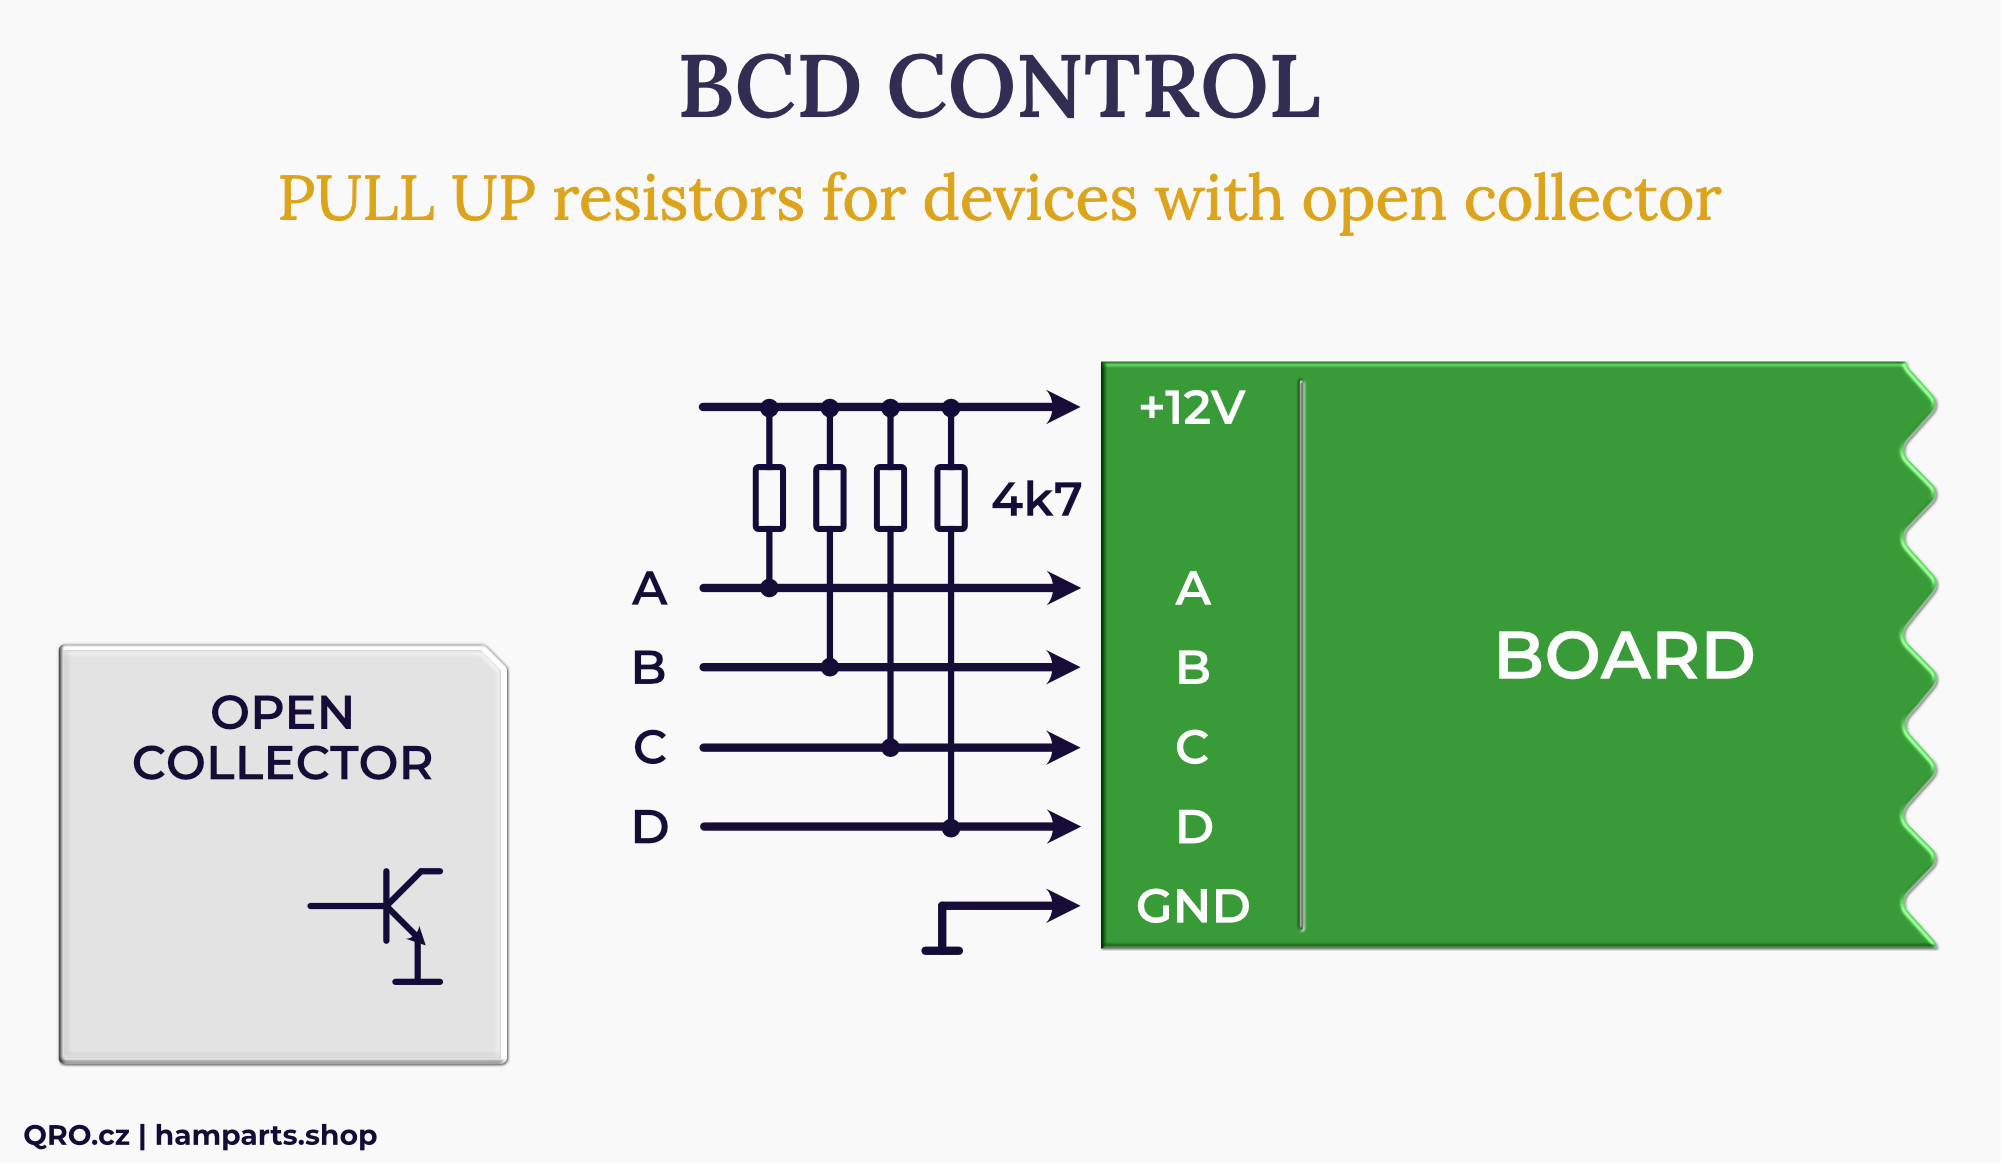 Open collector device BCD control by qro.cz hamparts.shop